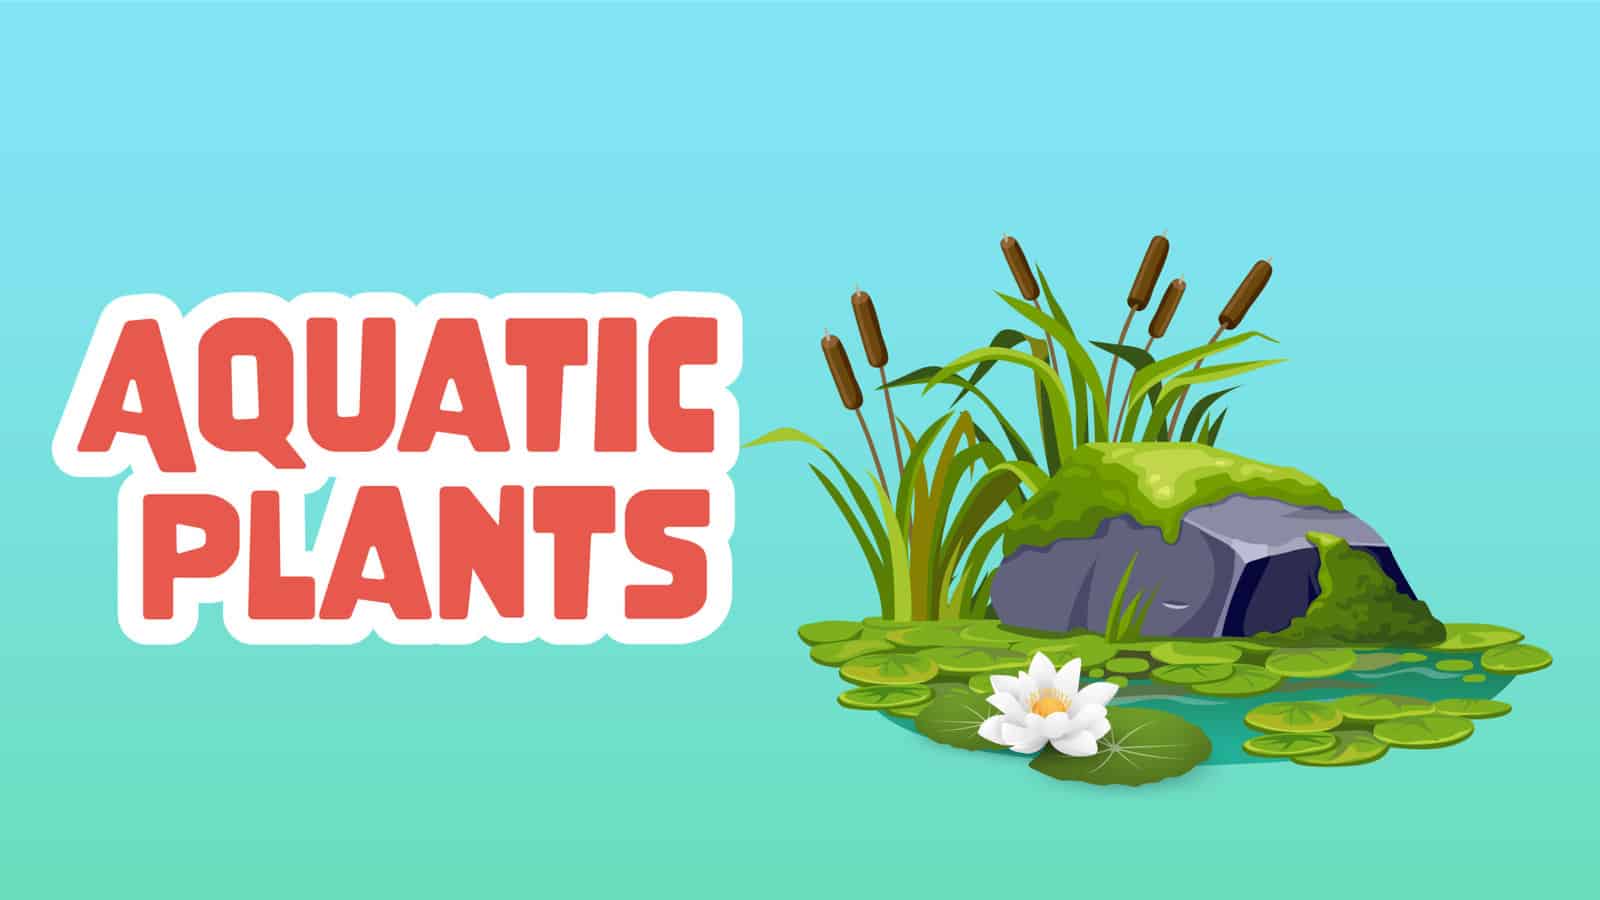 Aquatic Plants Facts for Kids – 5 Powerful Facts about Aquatic Plants